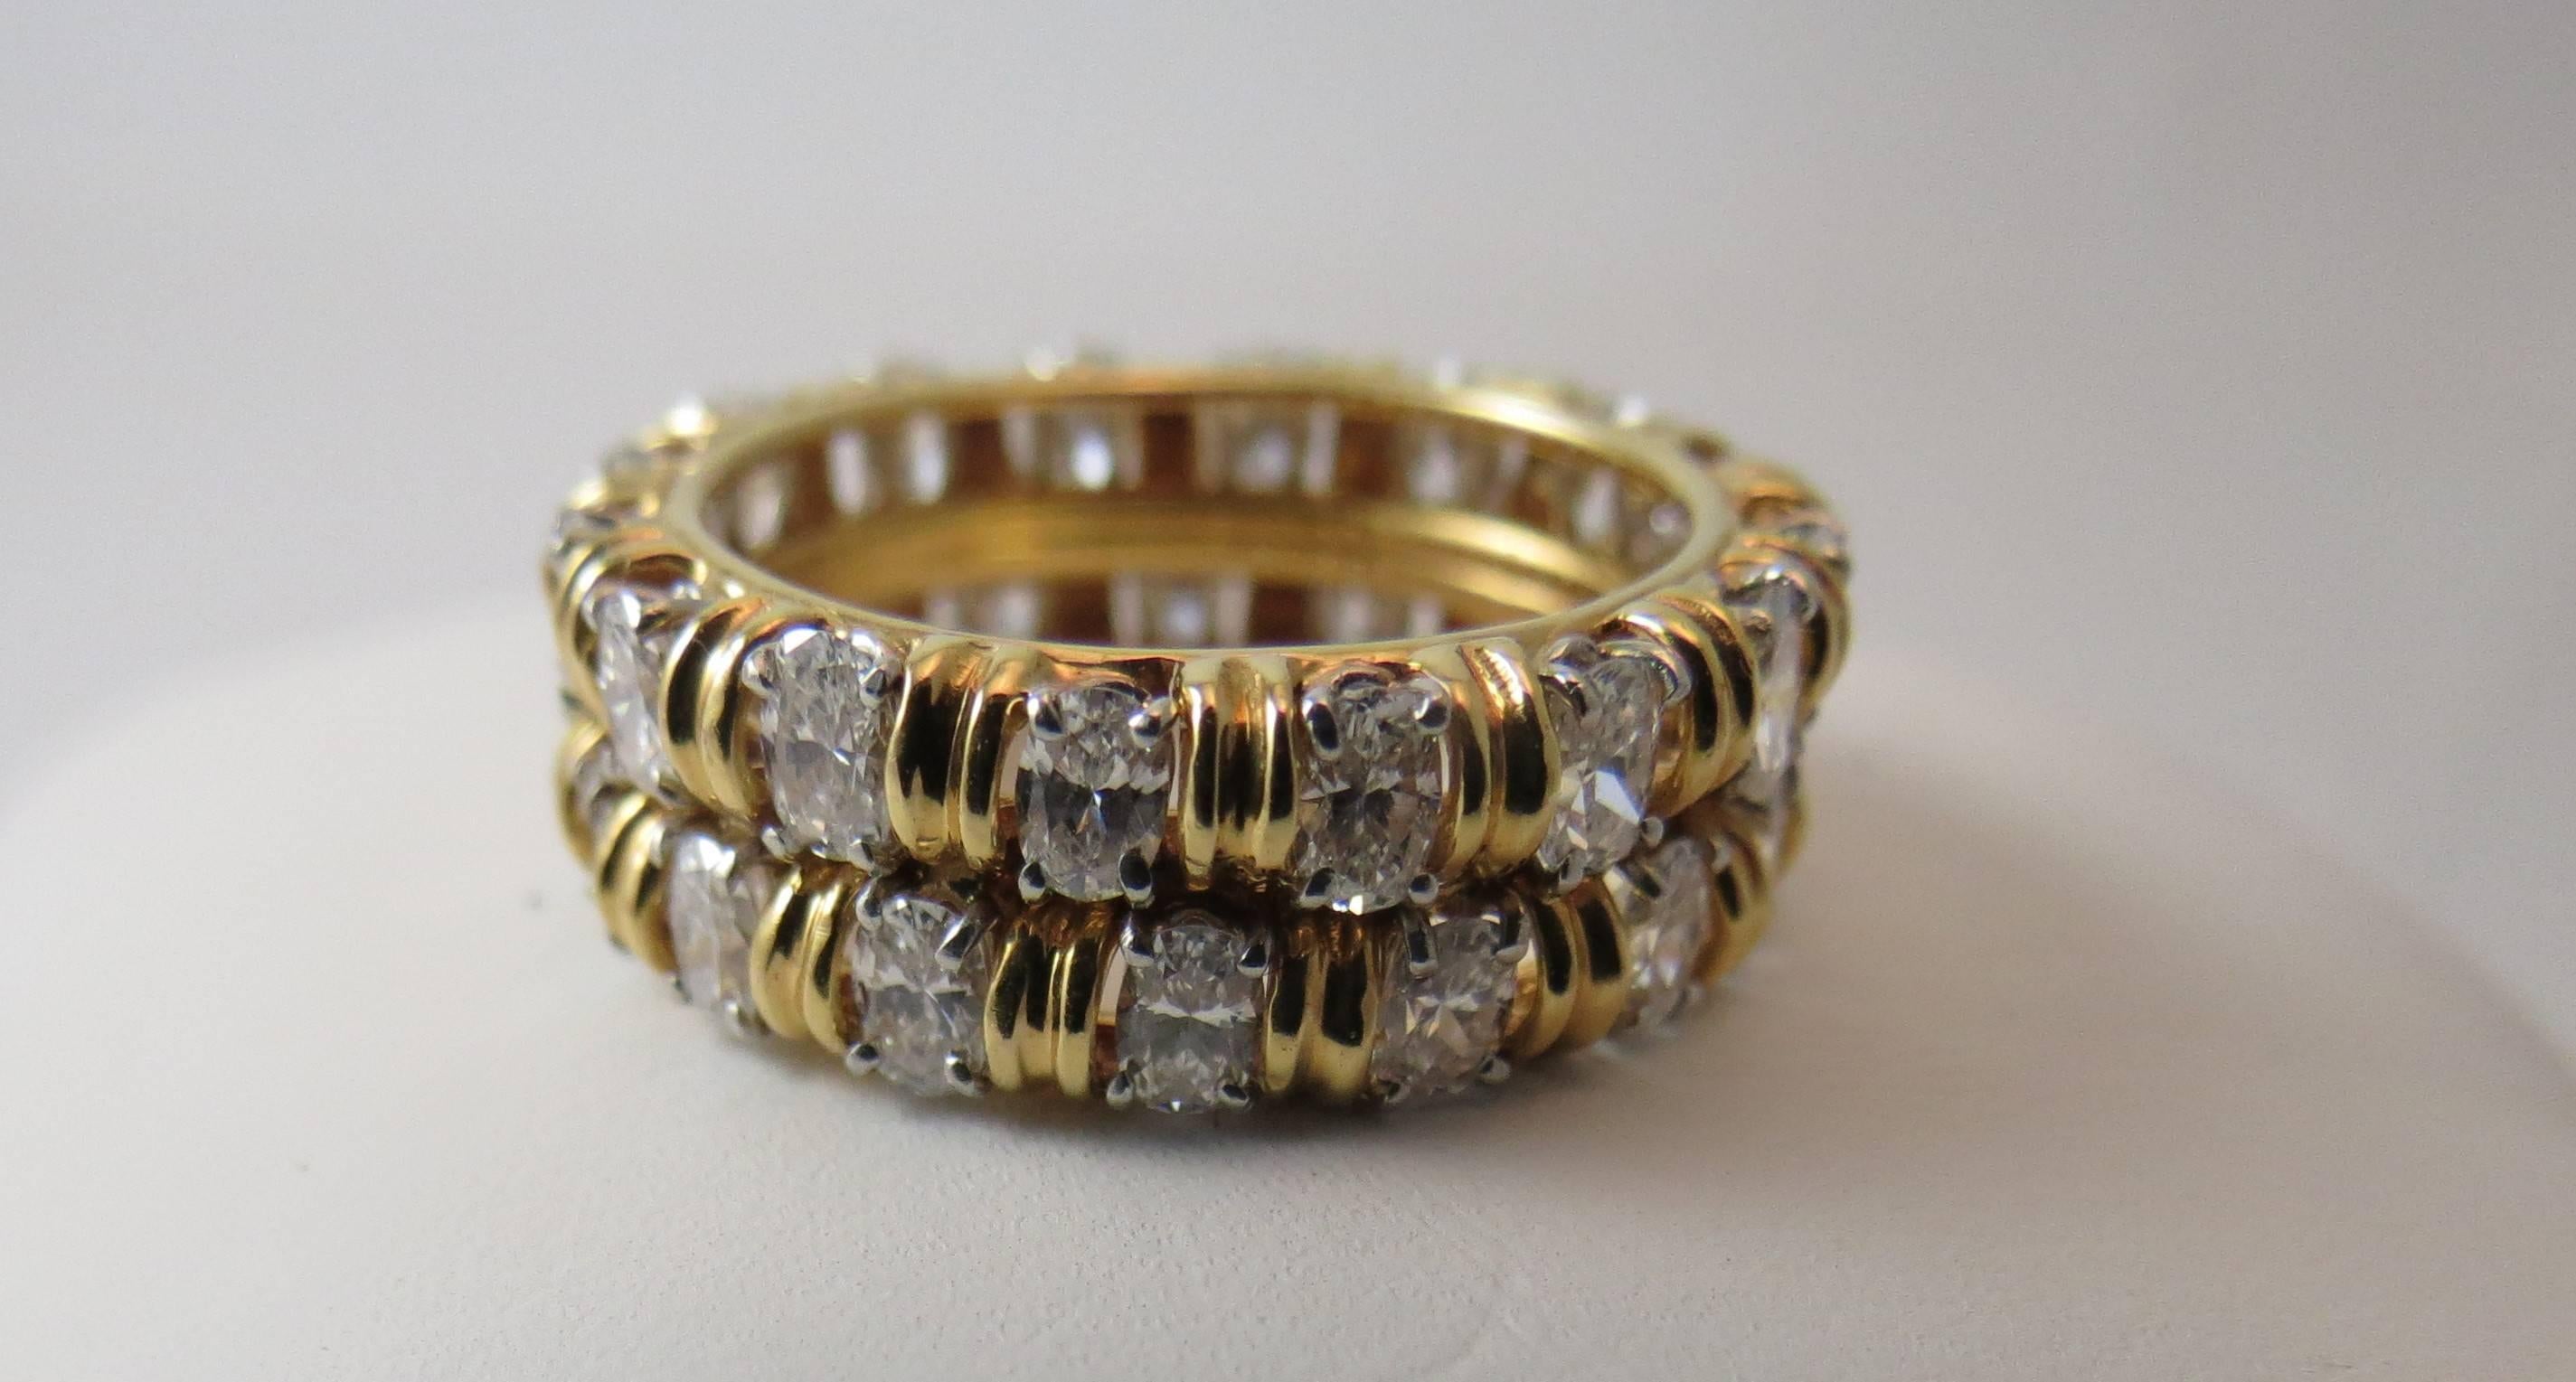 Oscar Heyman 18K yellow gold and platinum double row eternity band set with 32 oval diamonds weighing 2.35cts, F color, VS clarity
Finger size 7
May be sized
Currently retails for $16450